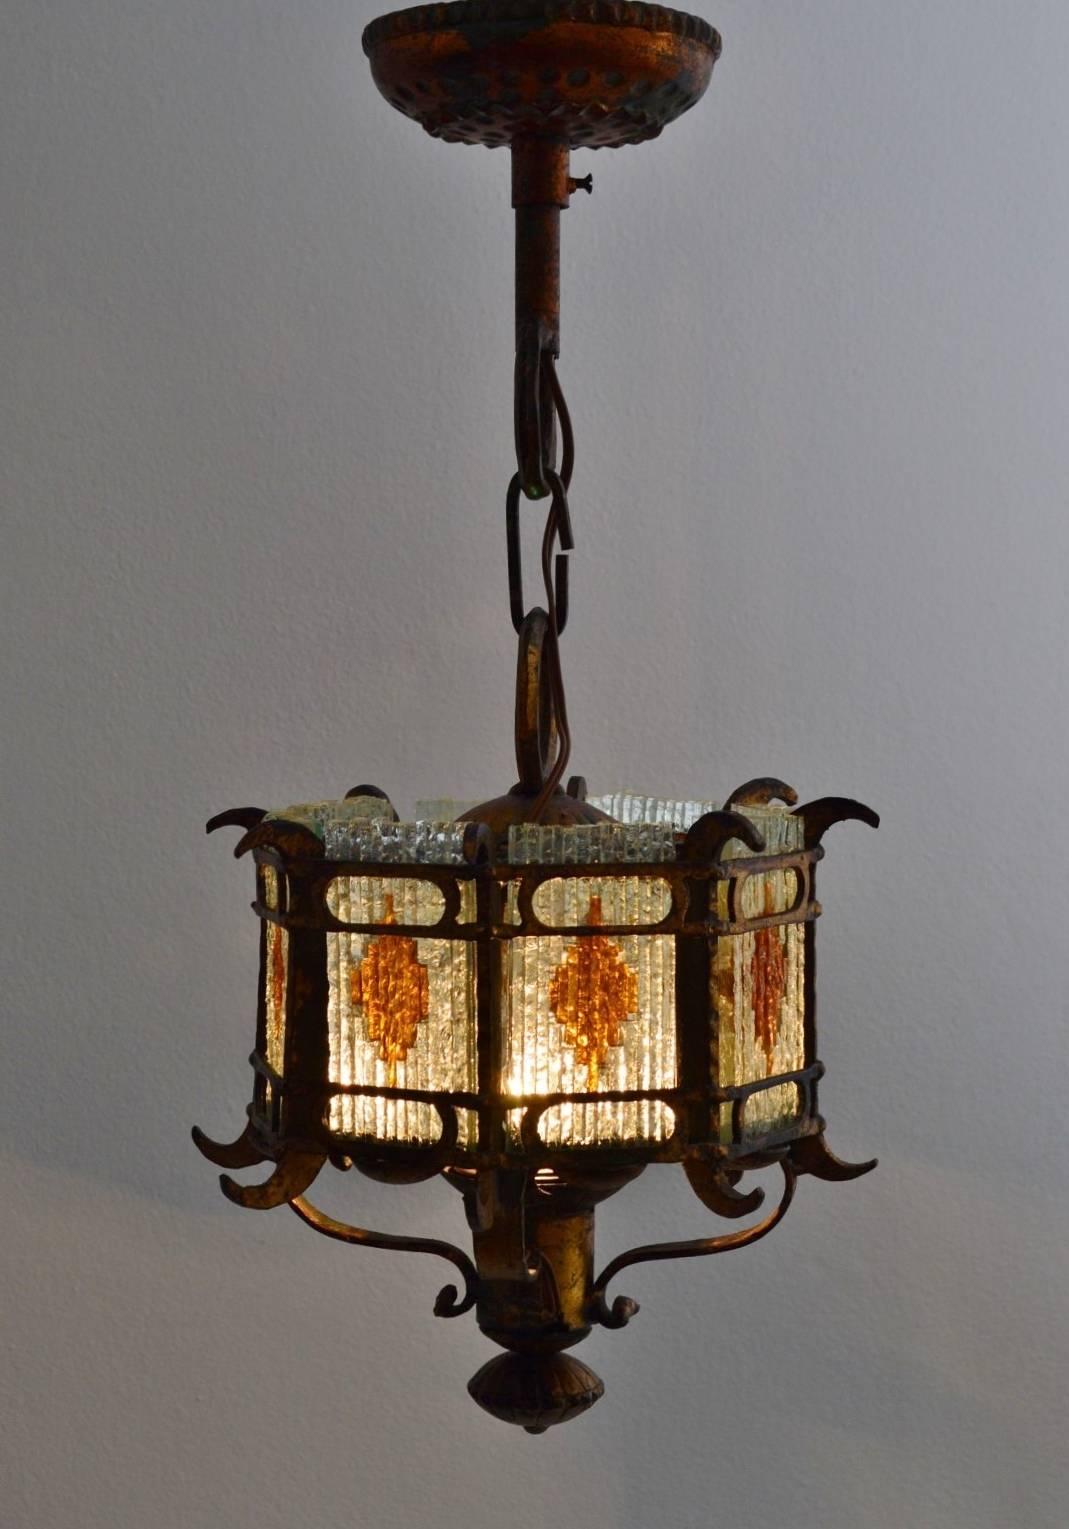 This heavy lantern in Brutalist style has been made in the 1960s in limited edition by a Master blacksmith.
The lamp's frame is made of heavy wrought iron, which has been hammered and gilt with effects in copper color.
It has eight pieces of cut